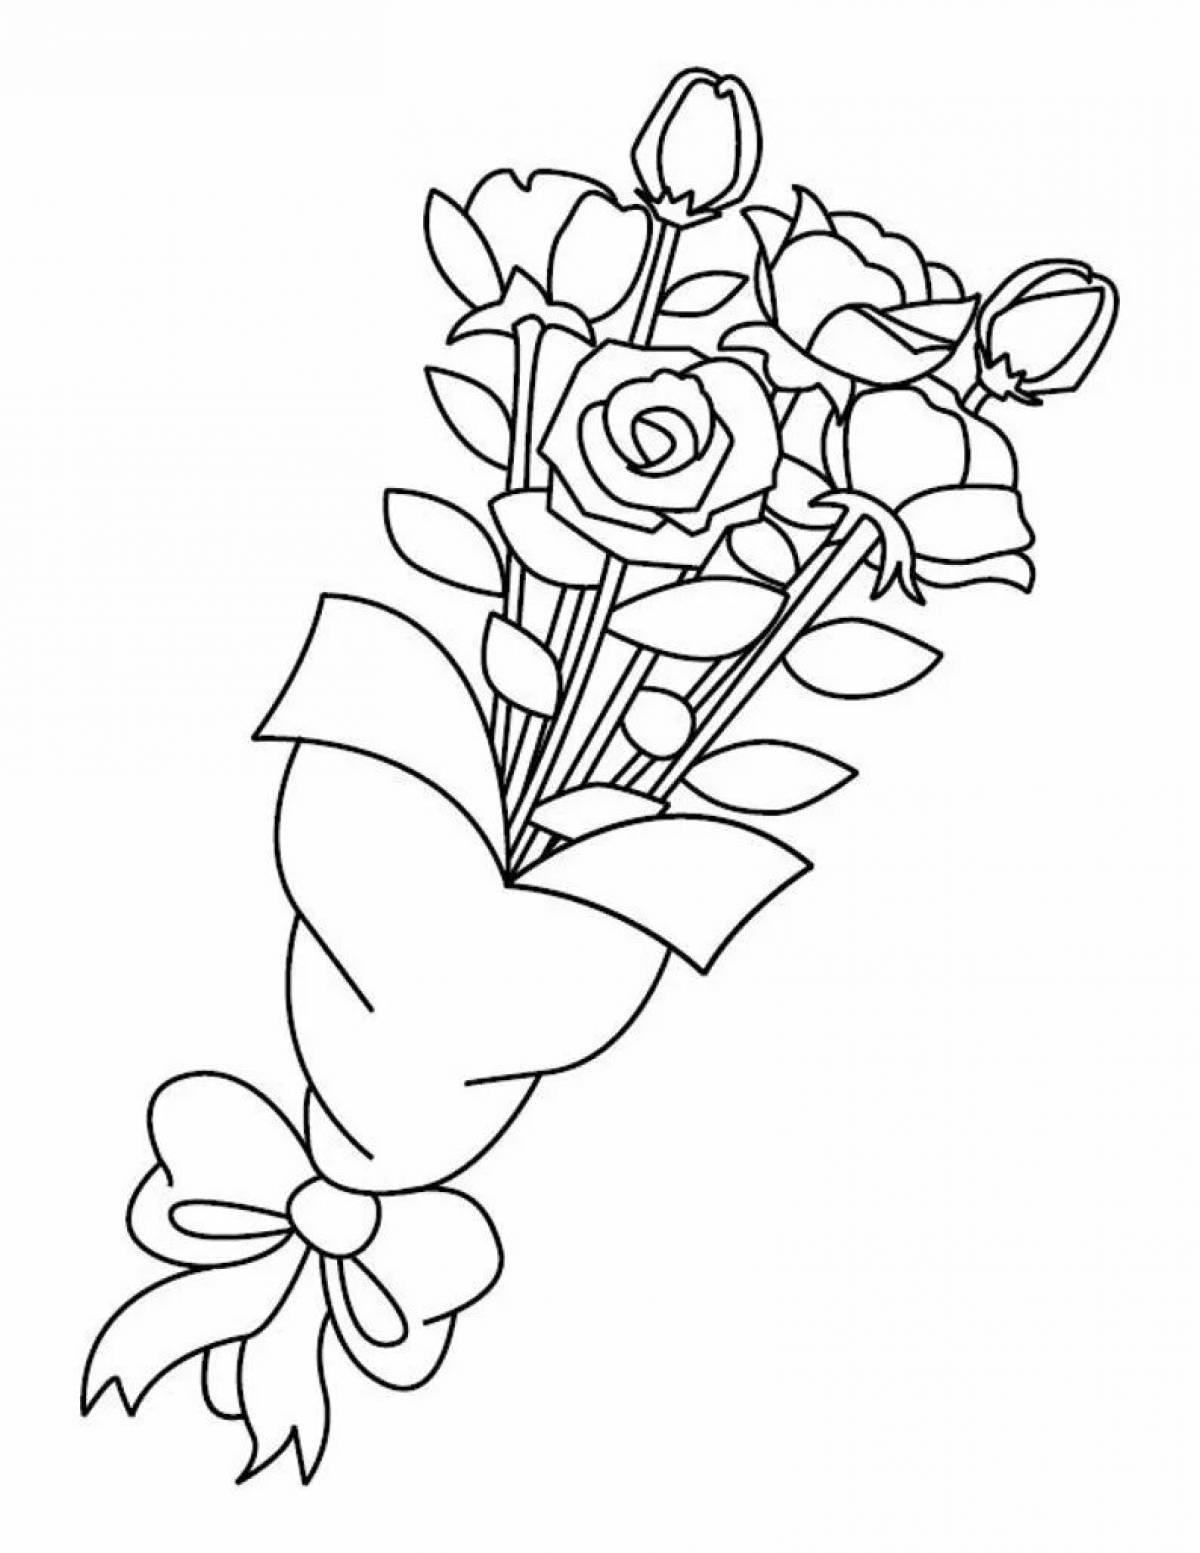 Colorful bouquet coloring book for mom